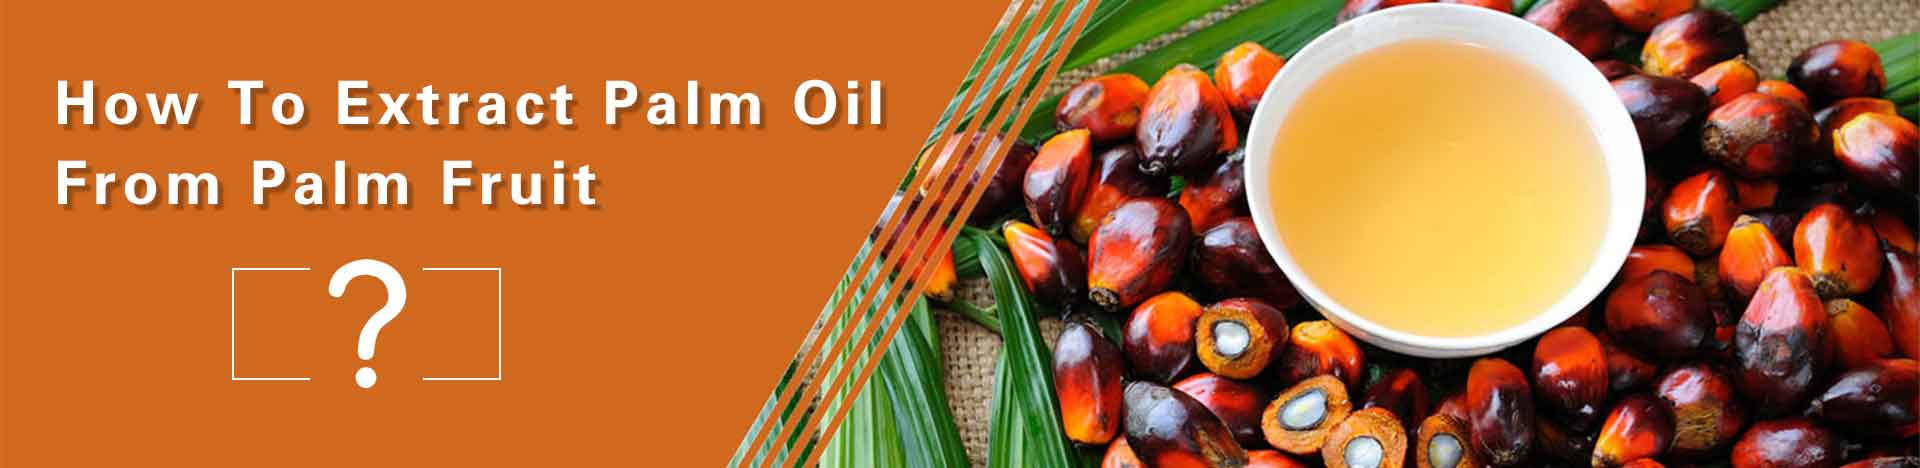 palm oil extraction technology